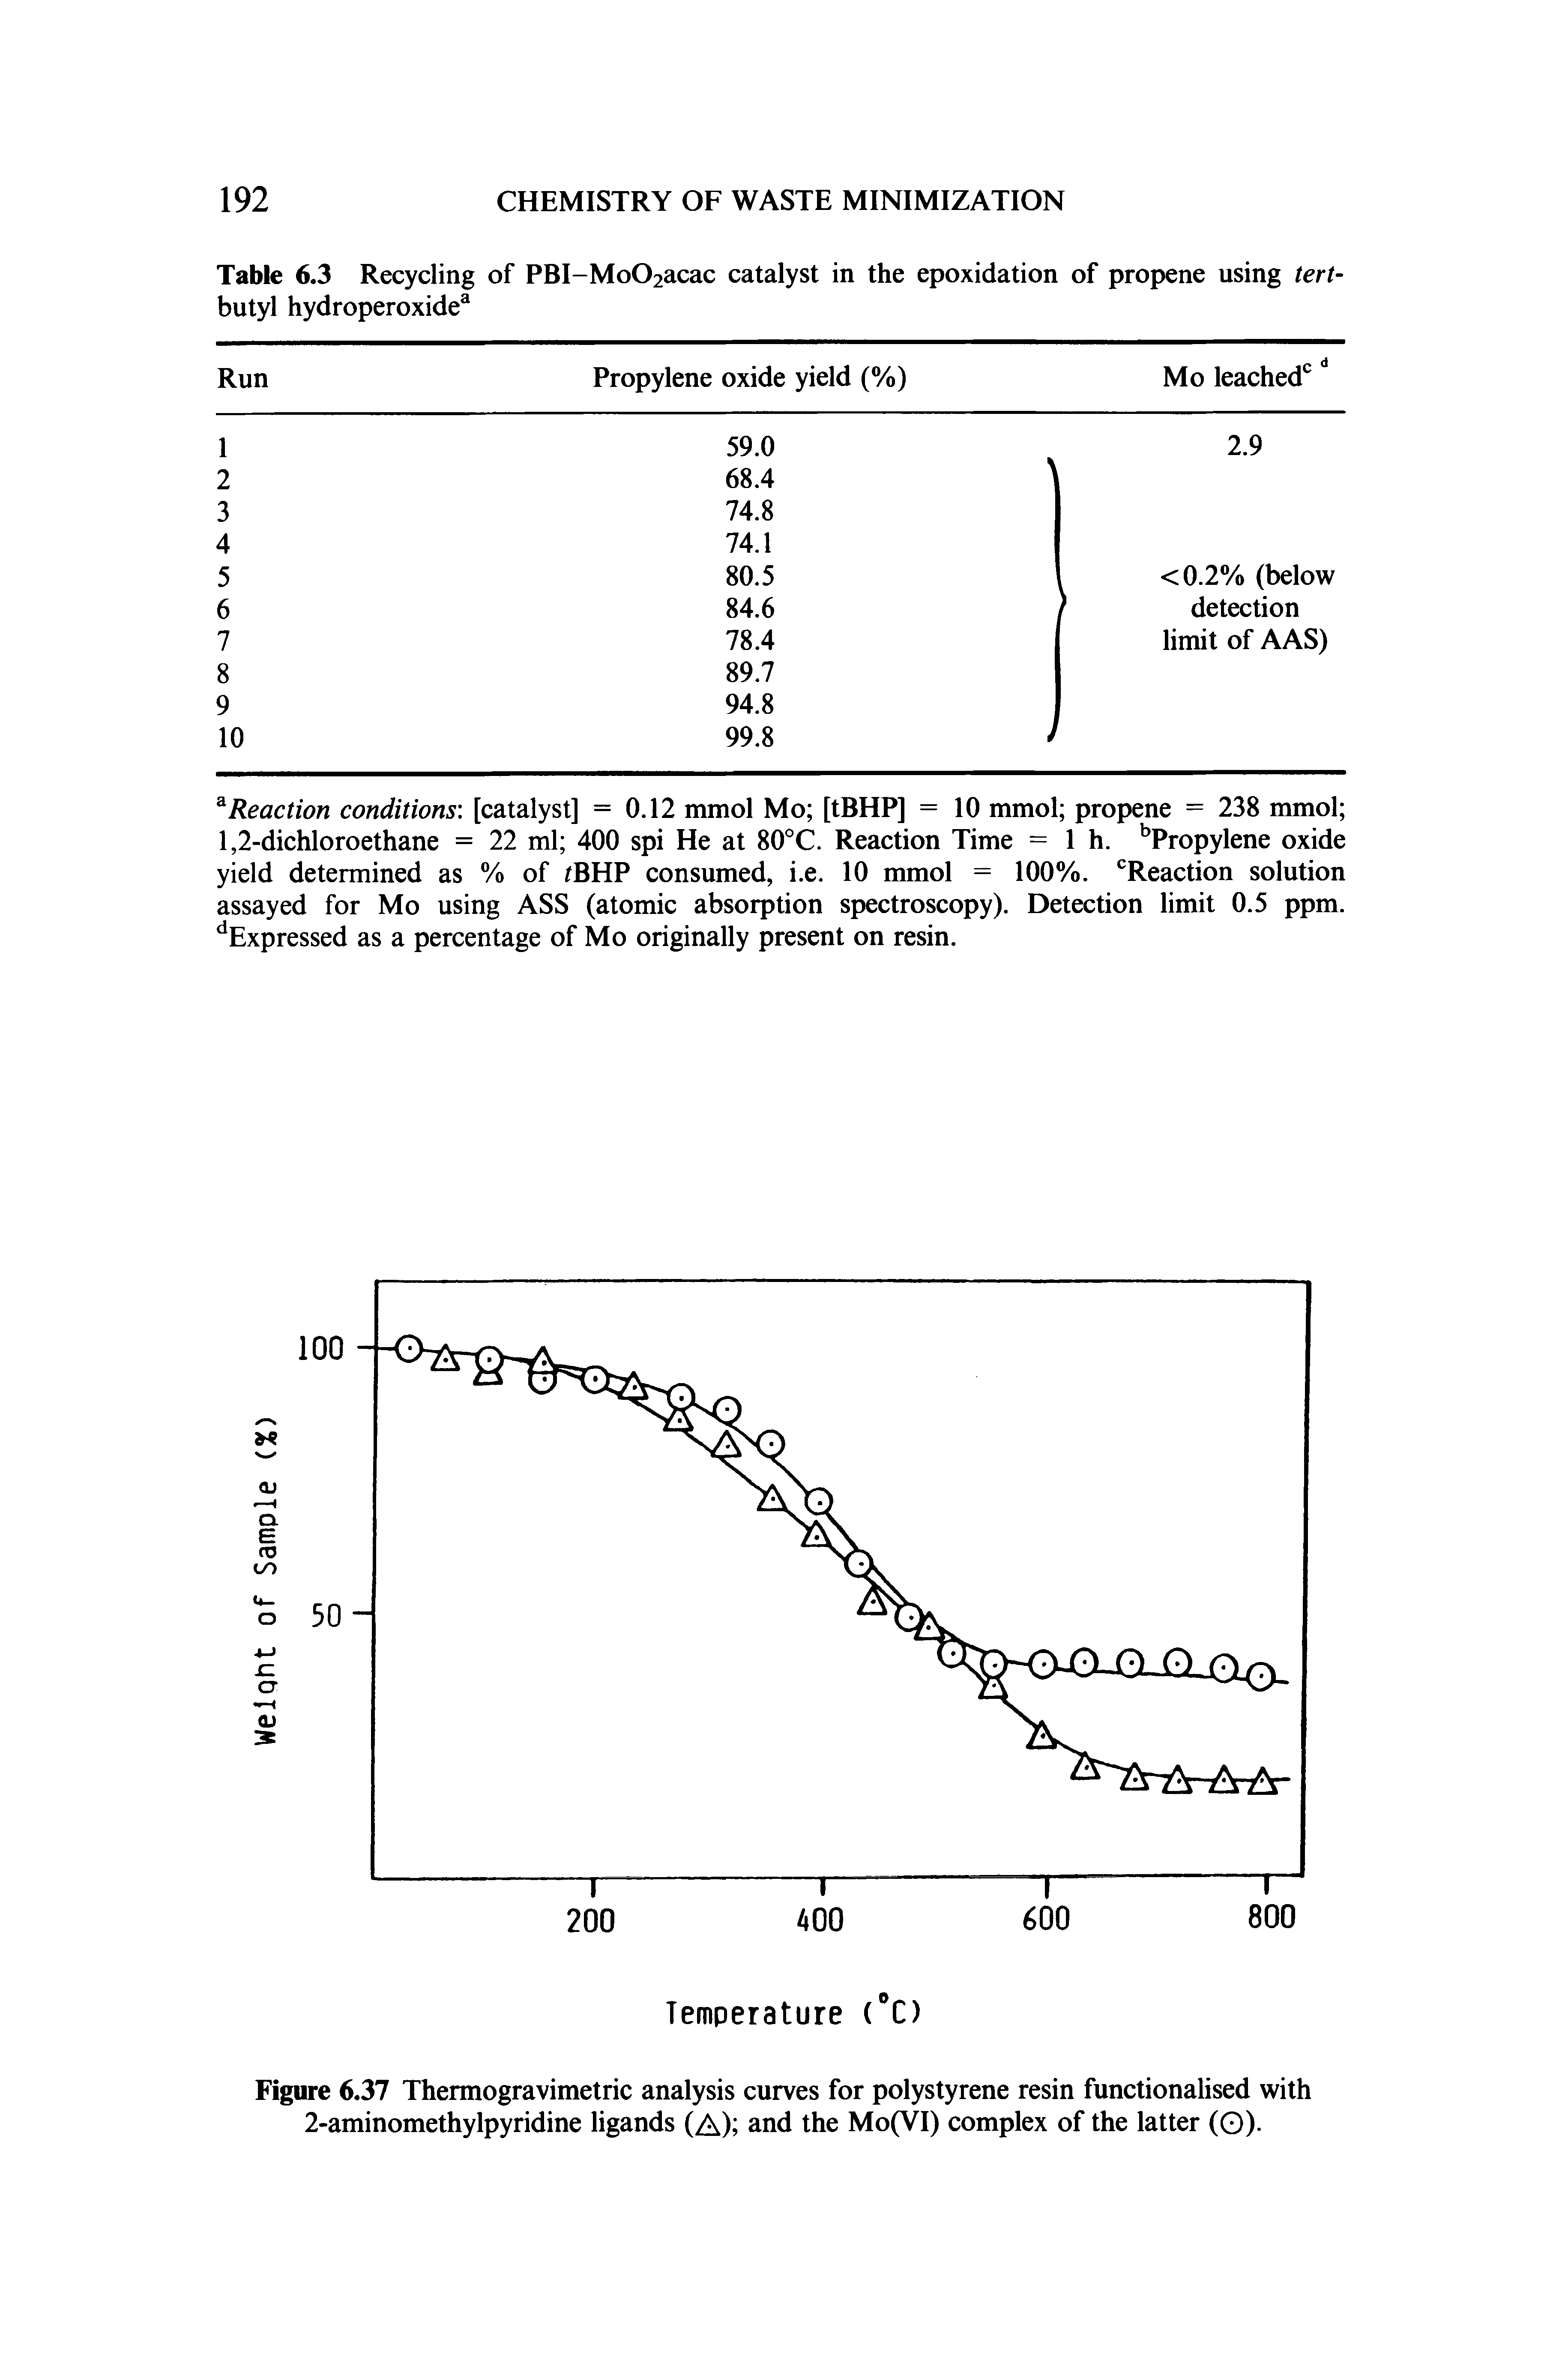 Figure 6.37 Thermogravimetric analysis curves for polystyrene resin functionalised with 2-aminomethylpyridine ligands (A) and the Mo(VI) complex of the latter (Q).